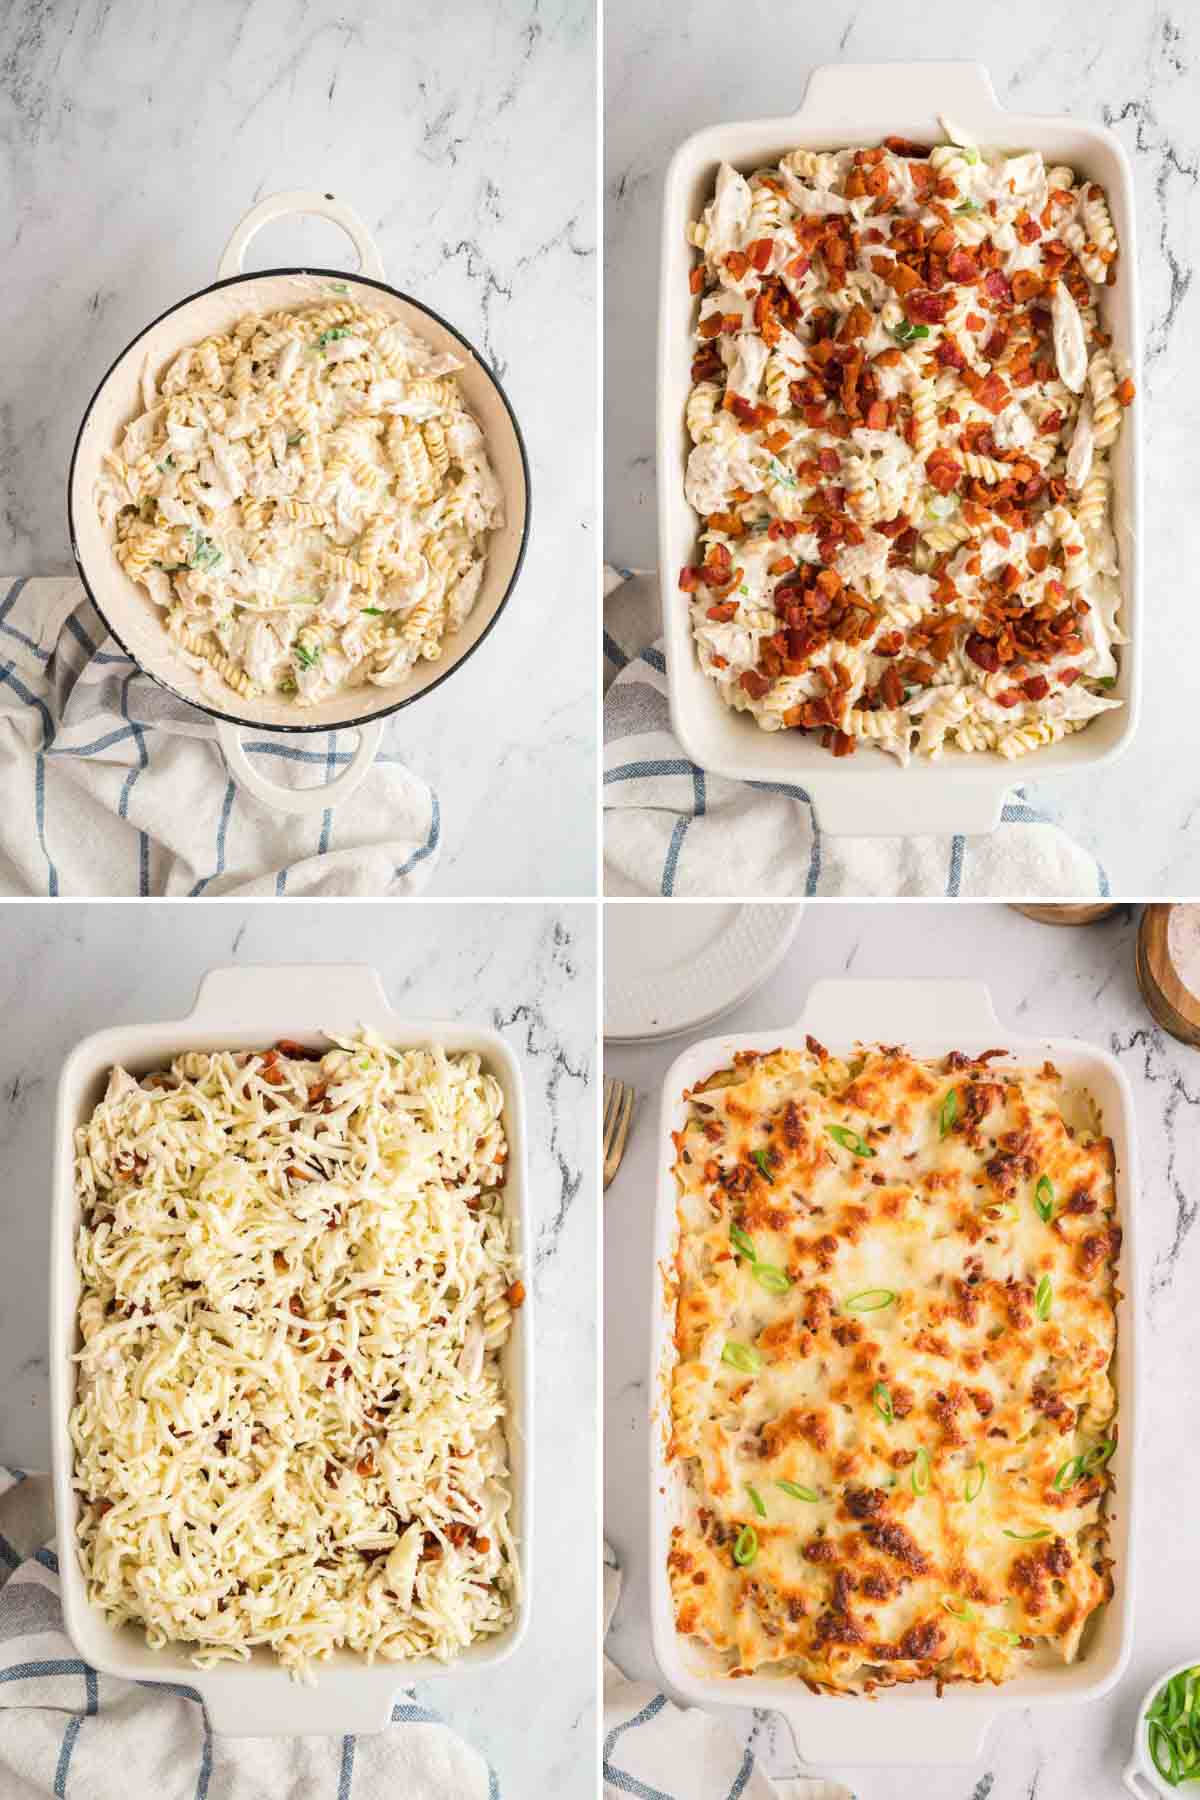 Four images showing the process of transferring chicken bacon ranch casserole ingredients to a dish and baking.